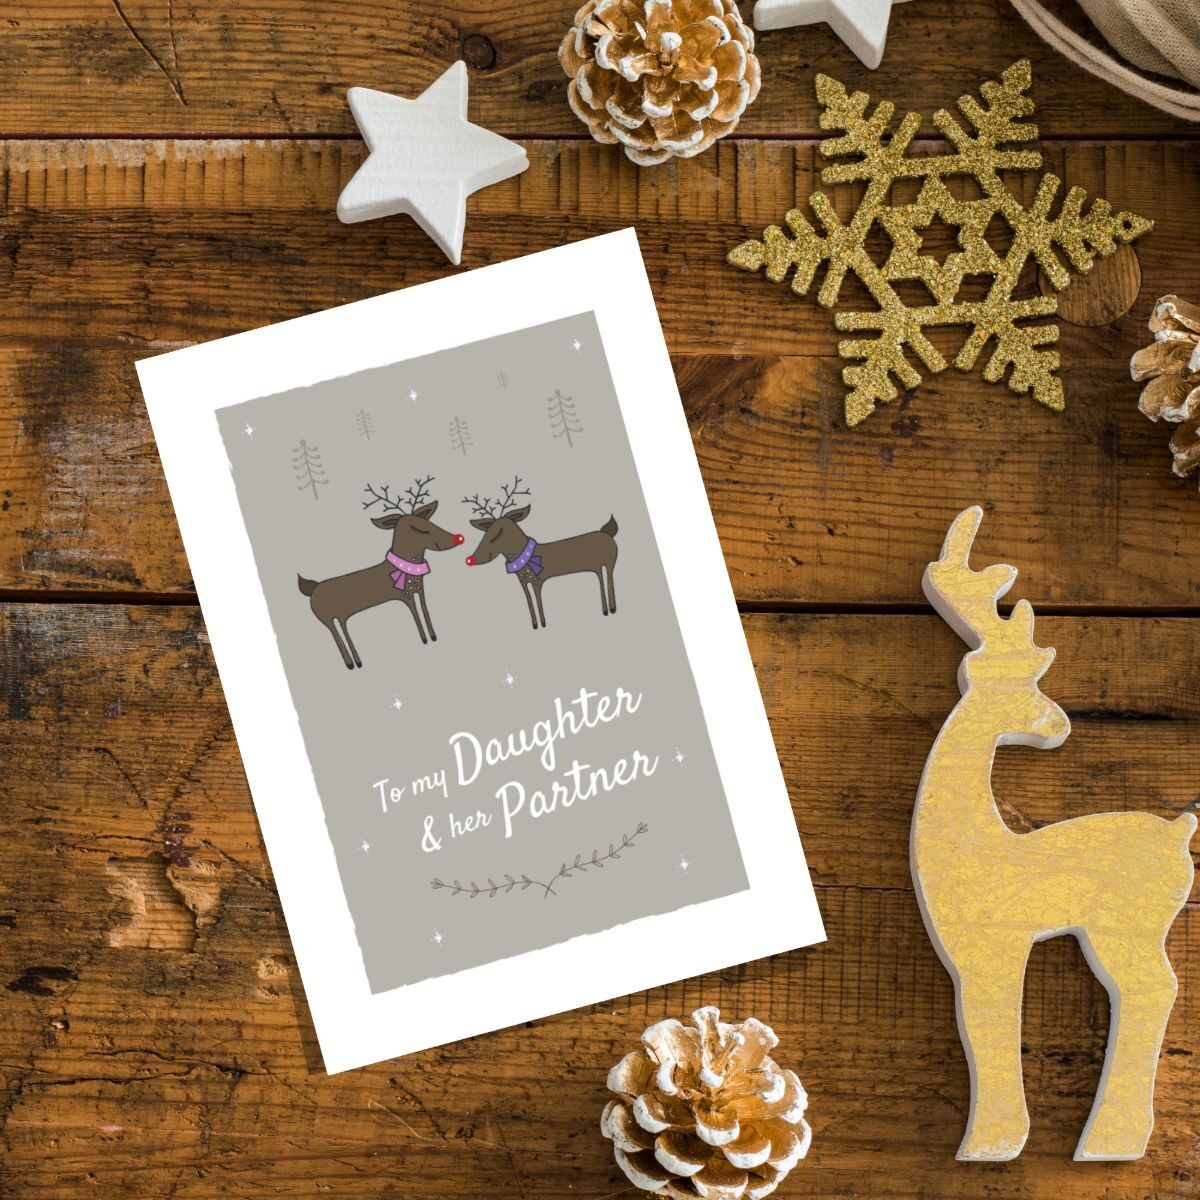 Reindeer Design Daughter and Partner Card for Christmas